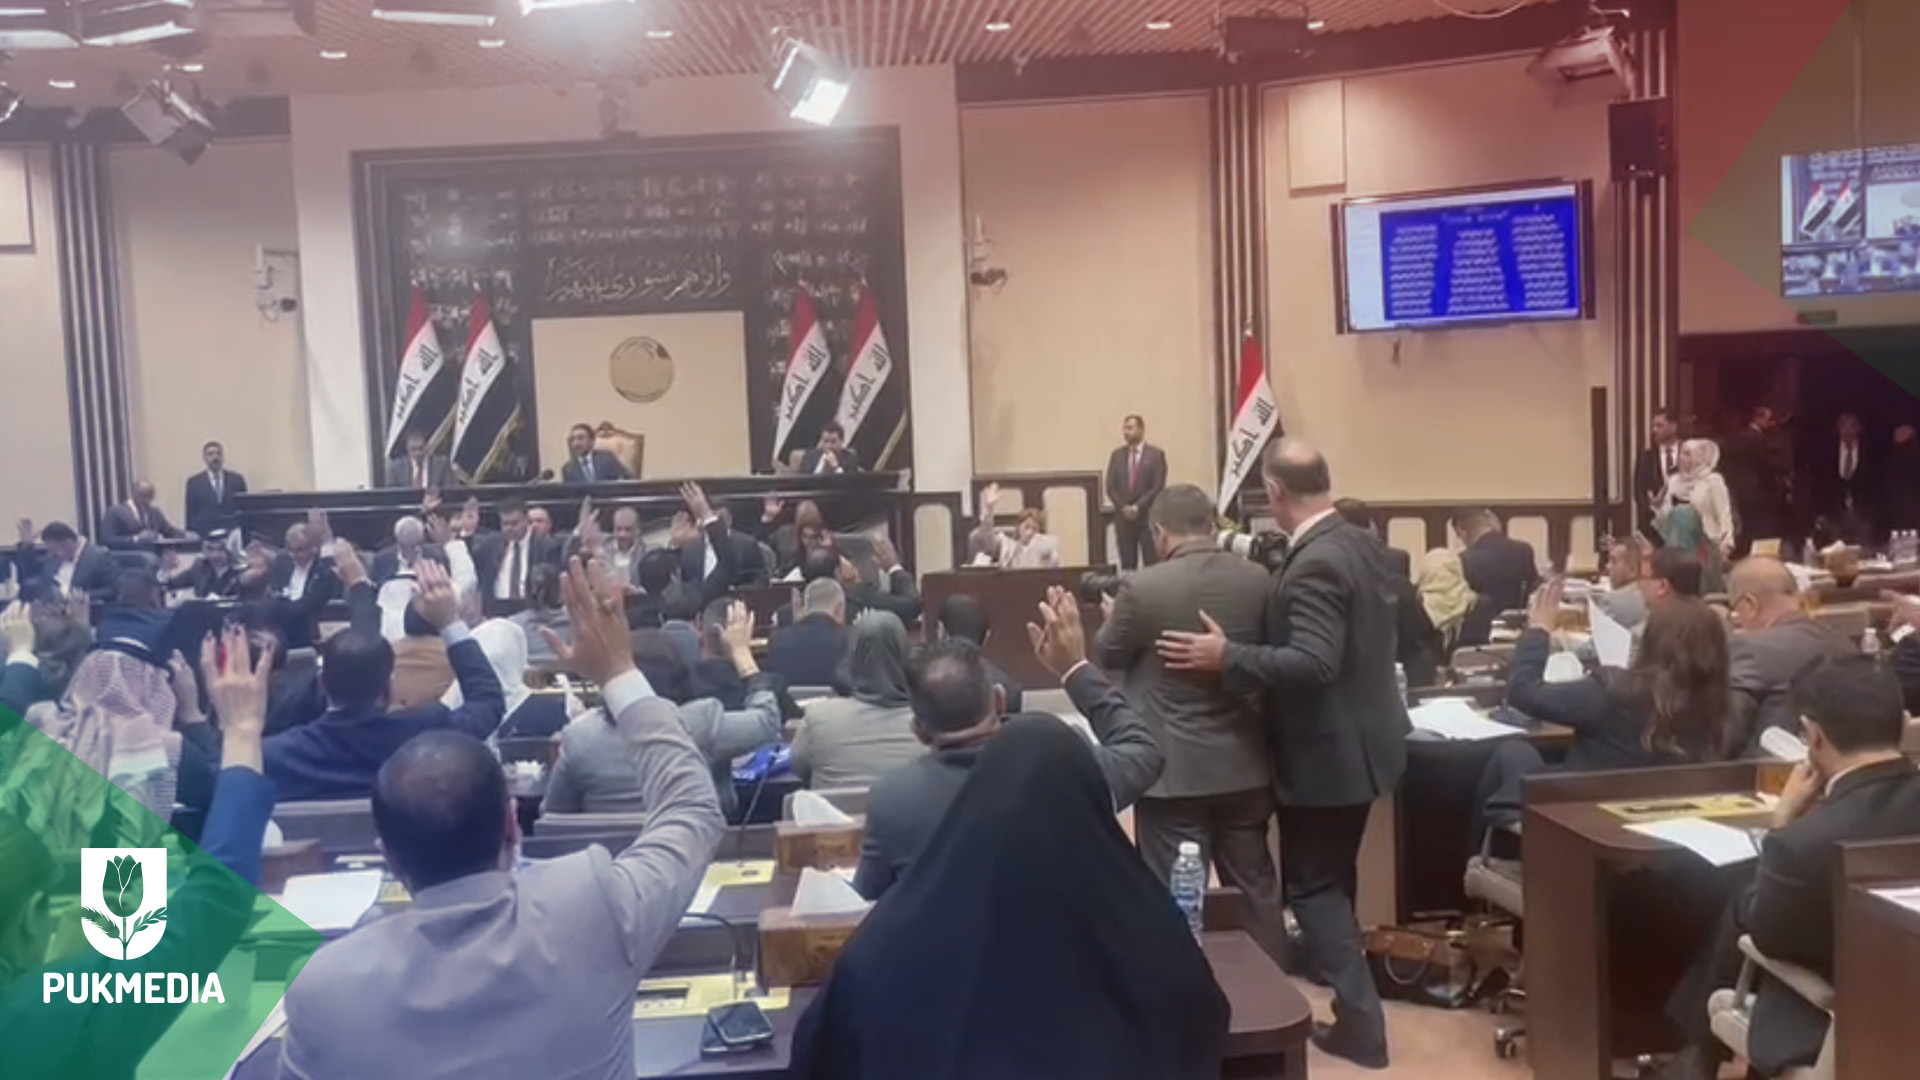  The Iraqi Parliament's session on amending the electoral law.